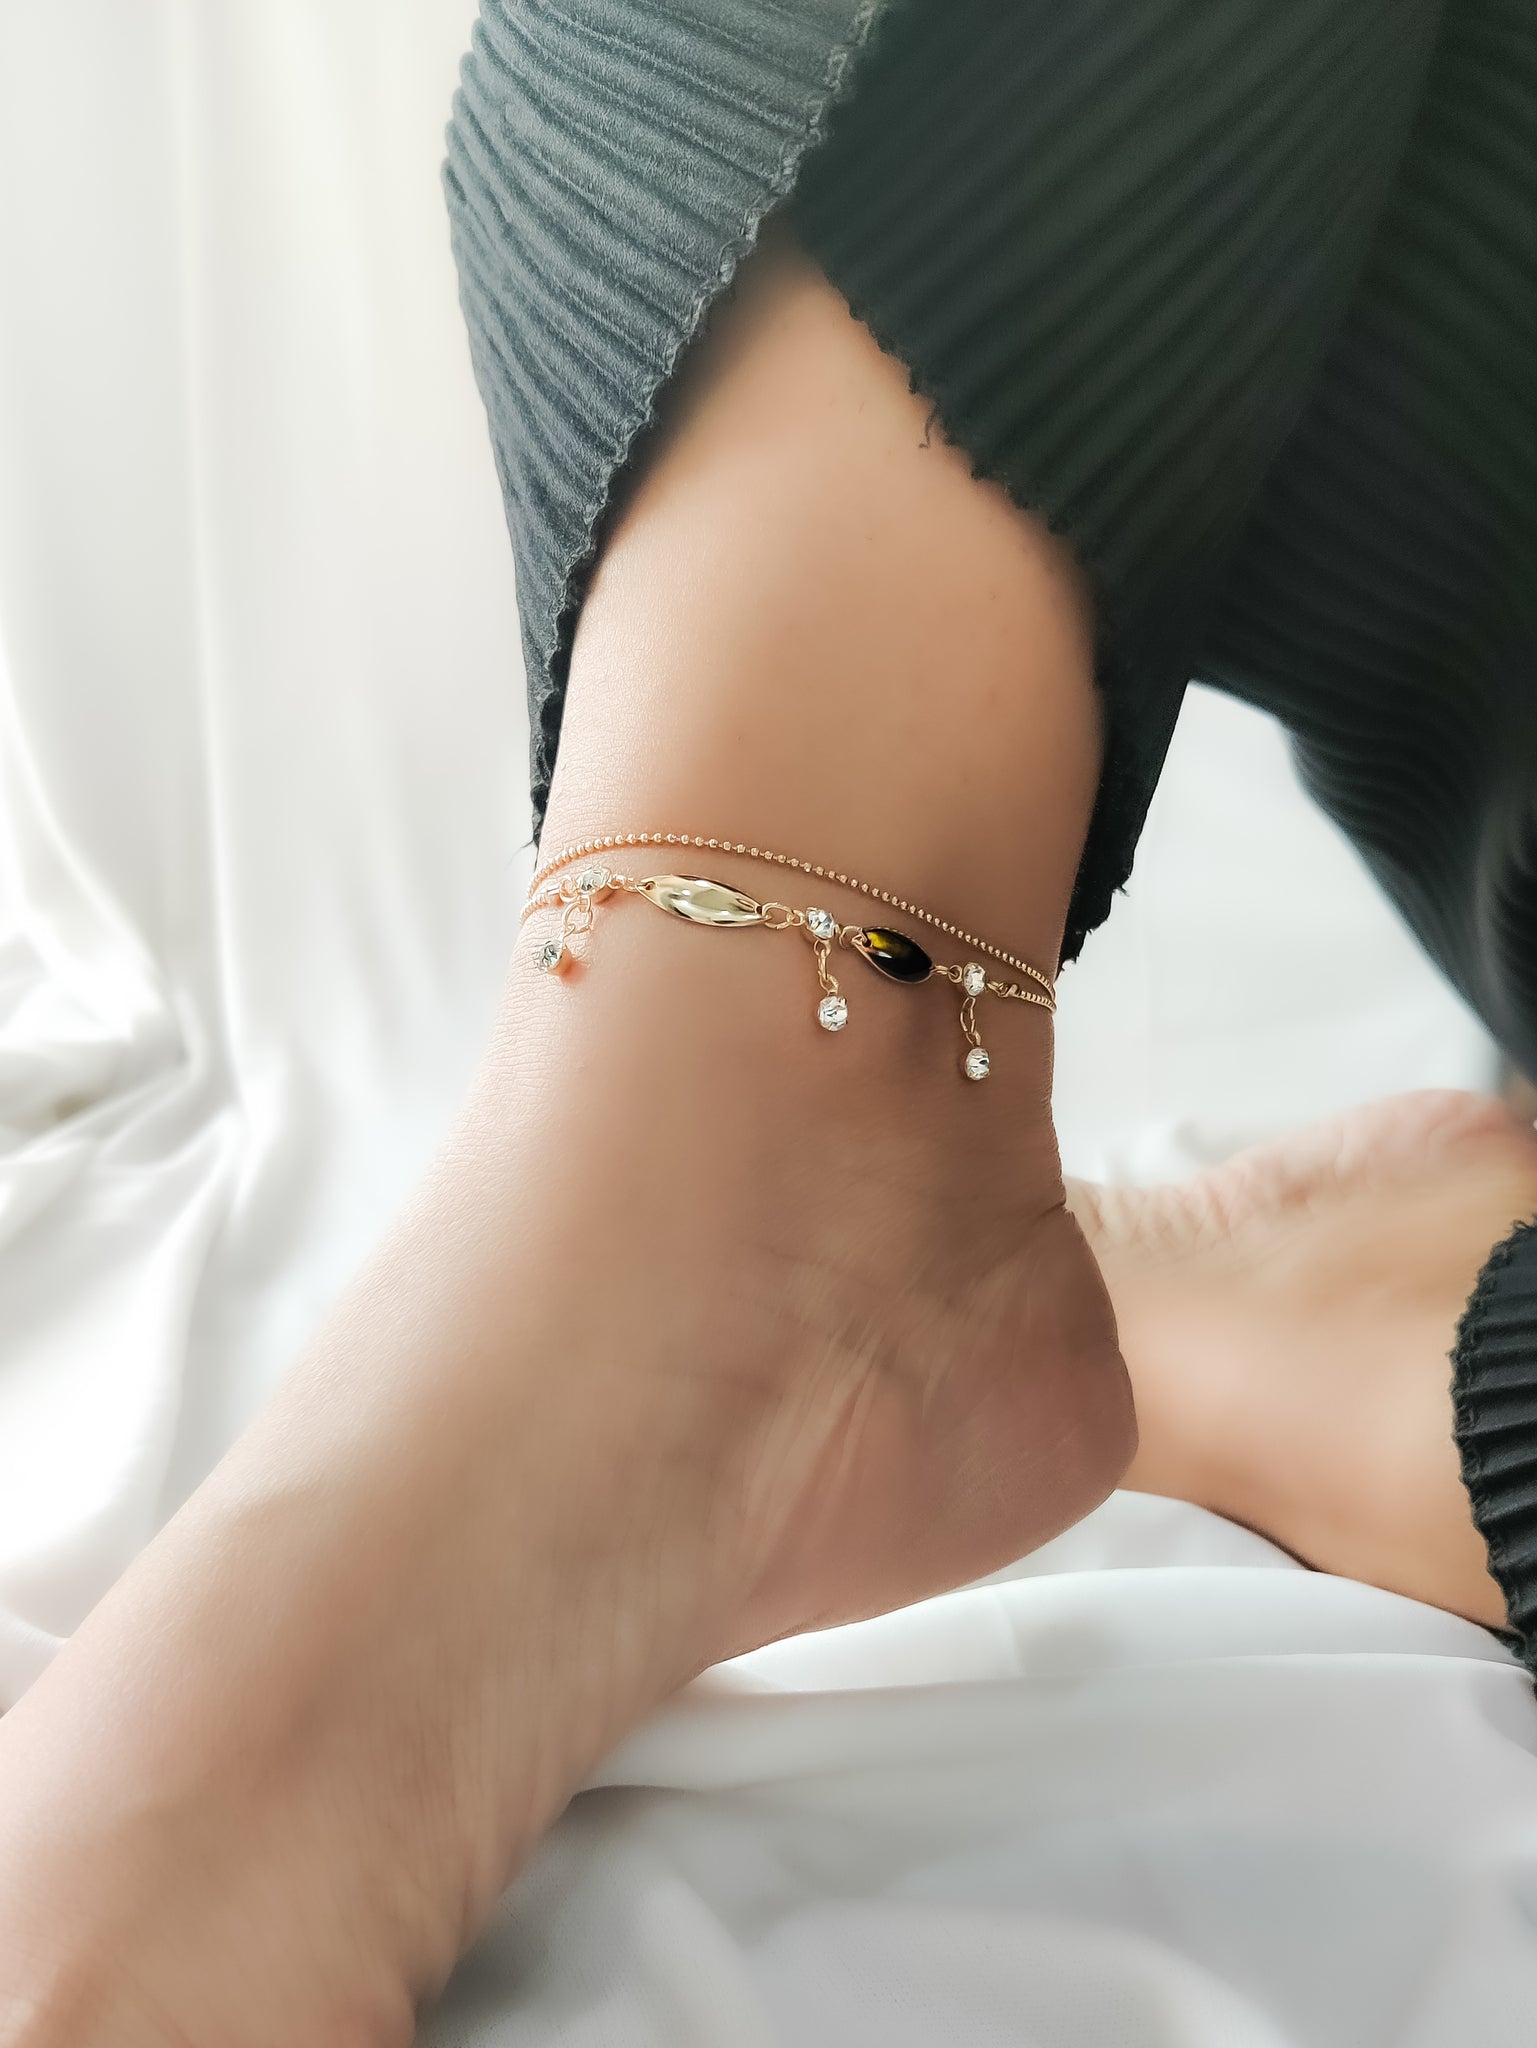 Dual layered embellished handcrafted Waterproof anklet